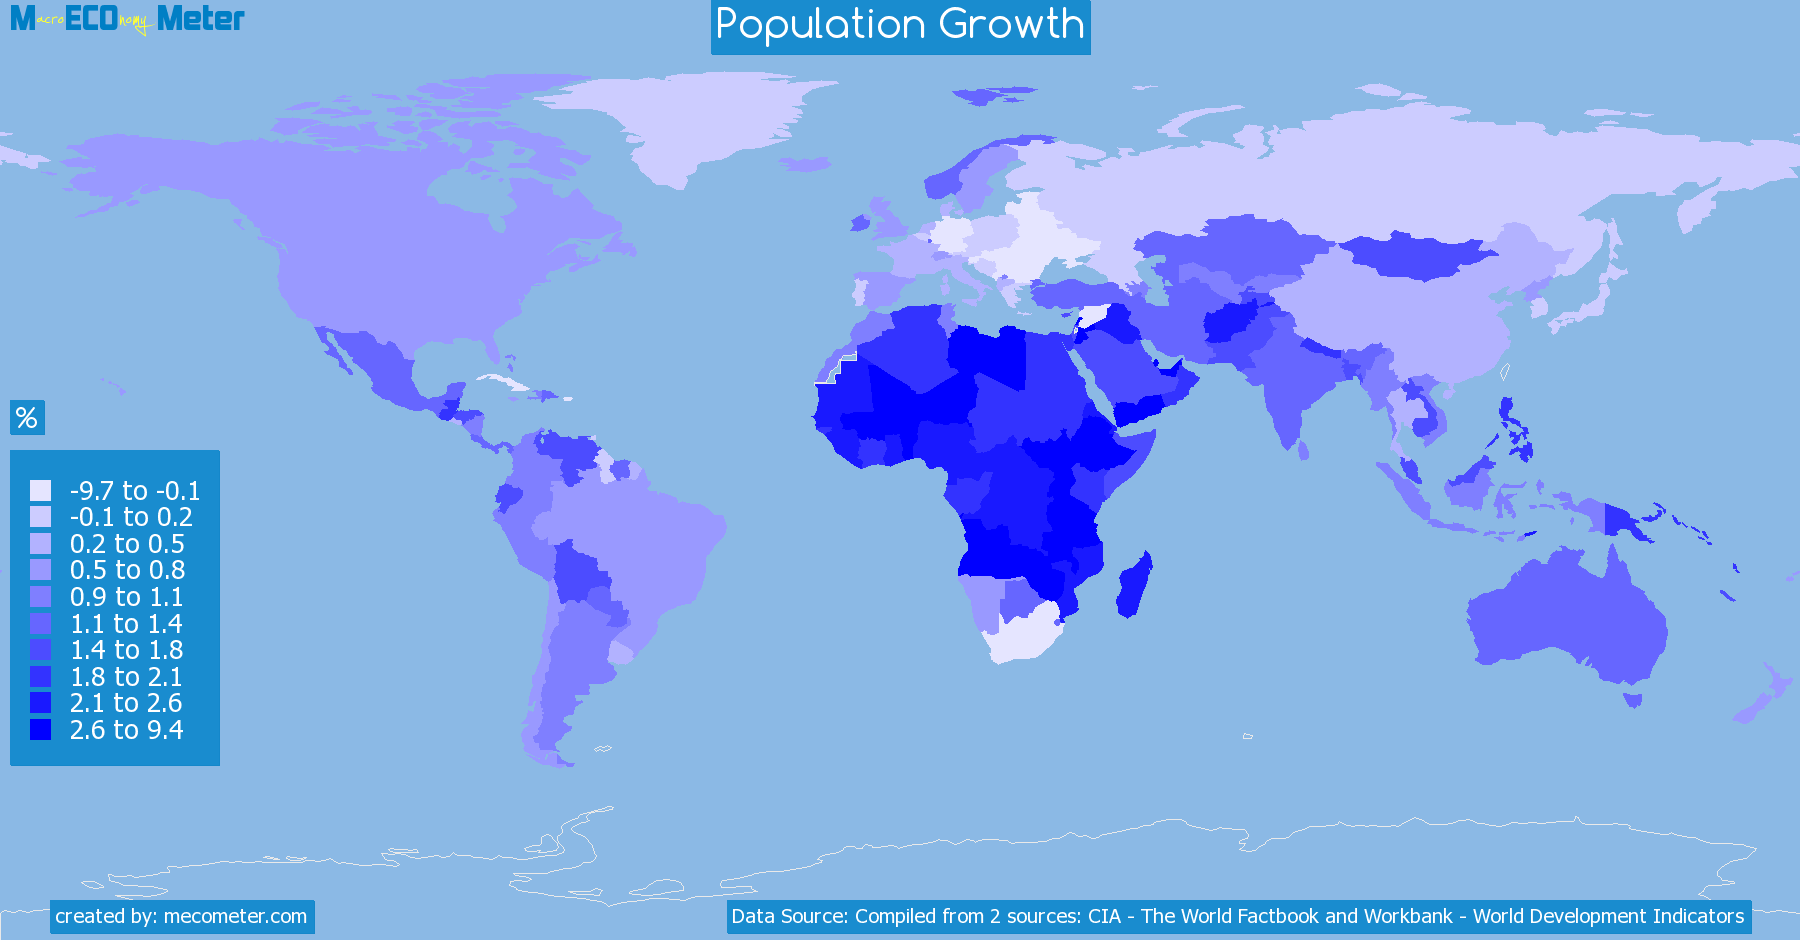 Worldmap of all countries colored to reflect the values of Population Growth